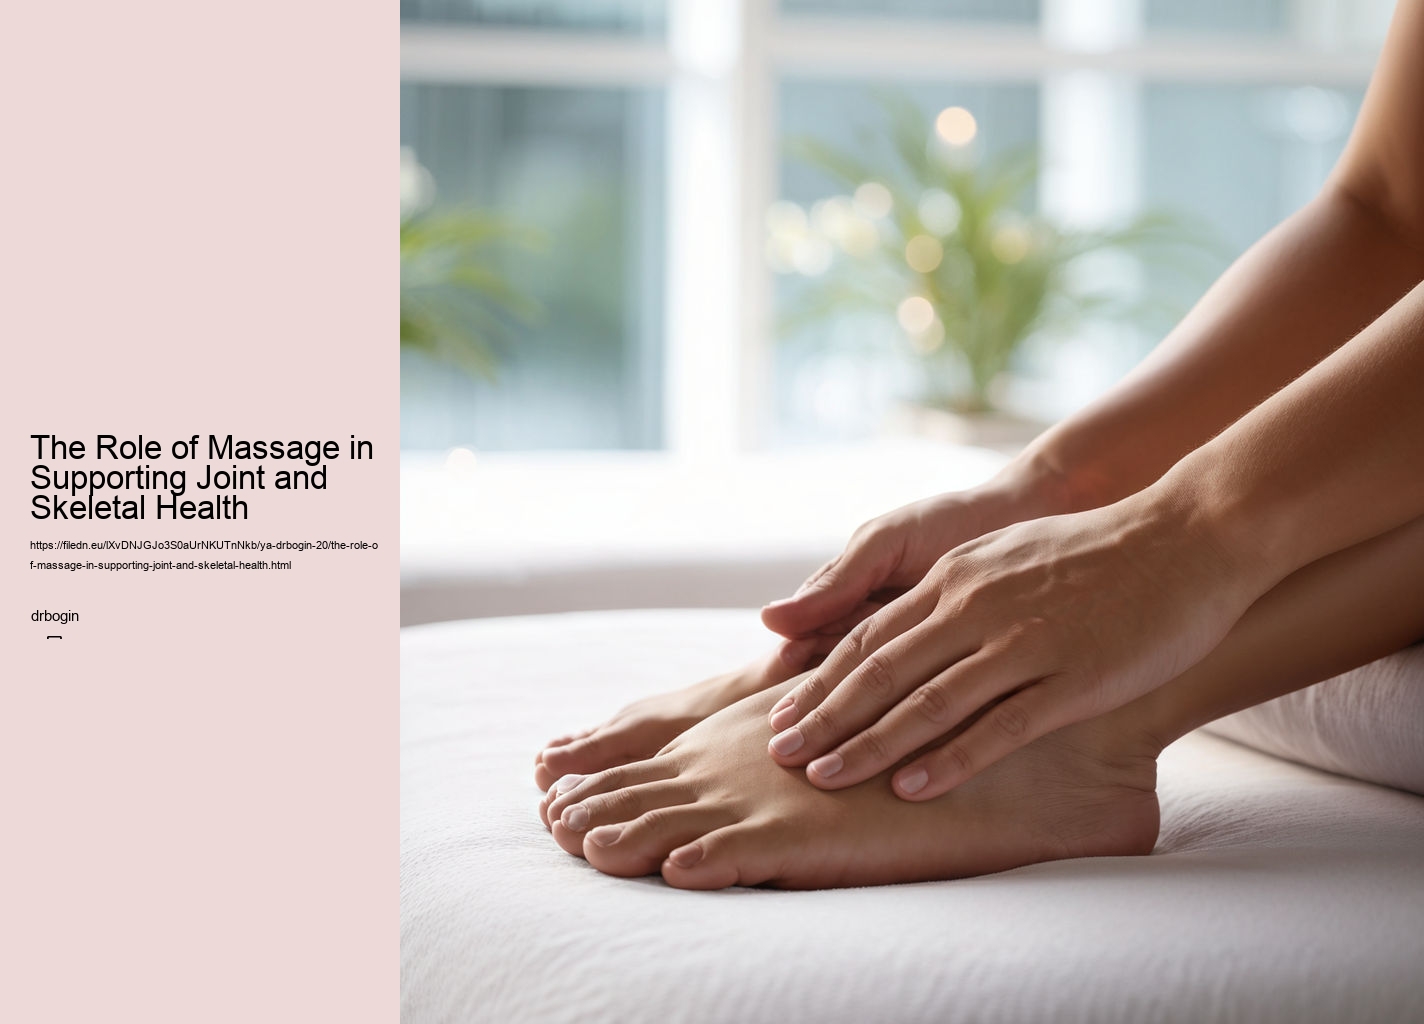 The Role of Massage in Supporting Joint and Skeletal Health